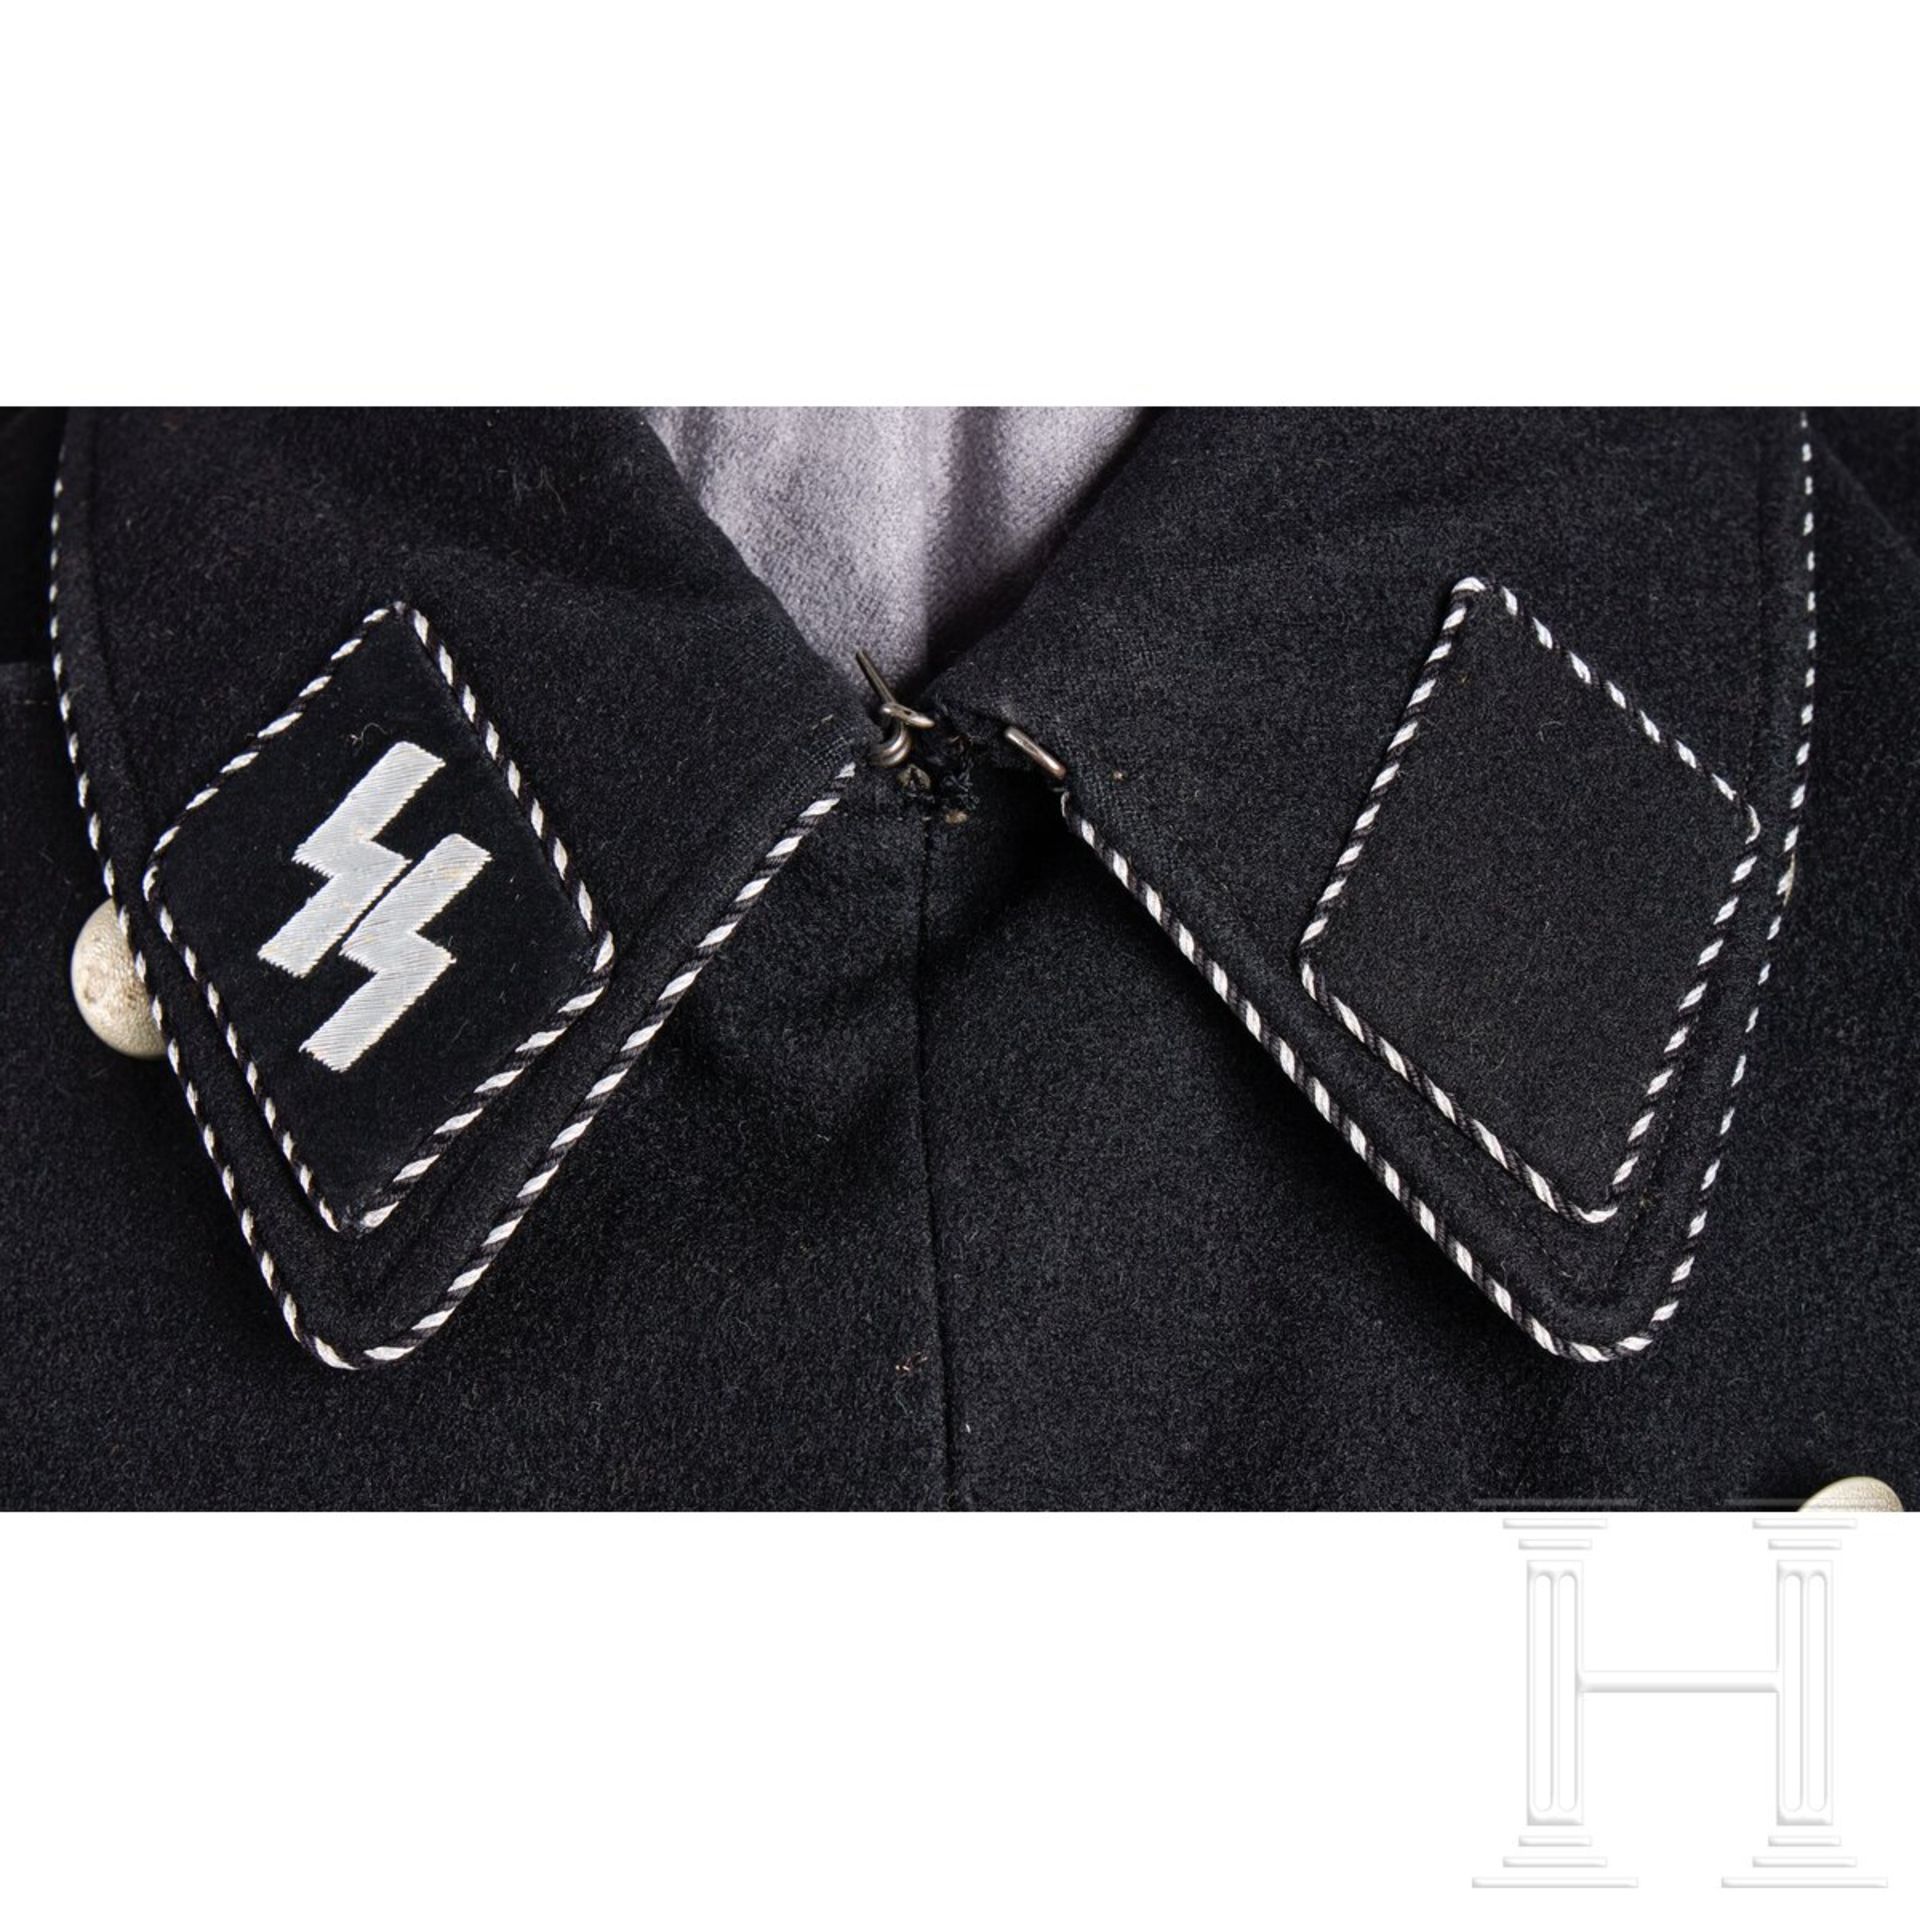 An Overcoat for a member of the Personal Staff of the Reichsführer-SS - Bild 6 aus 10